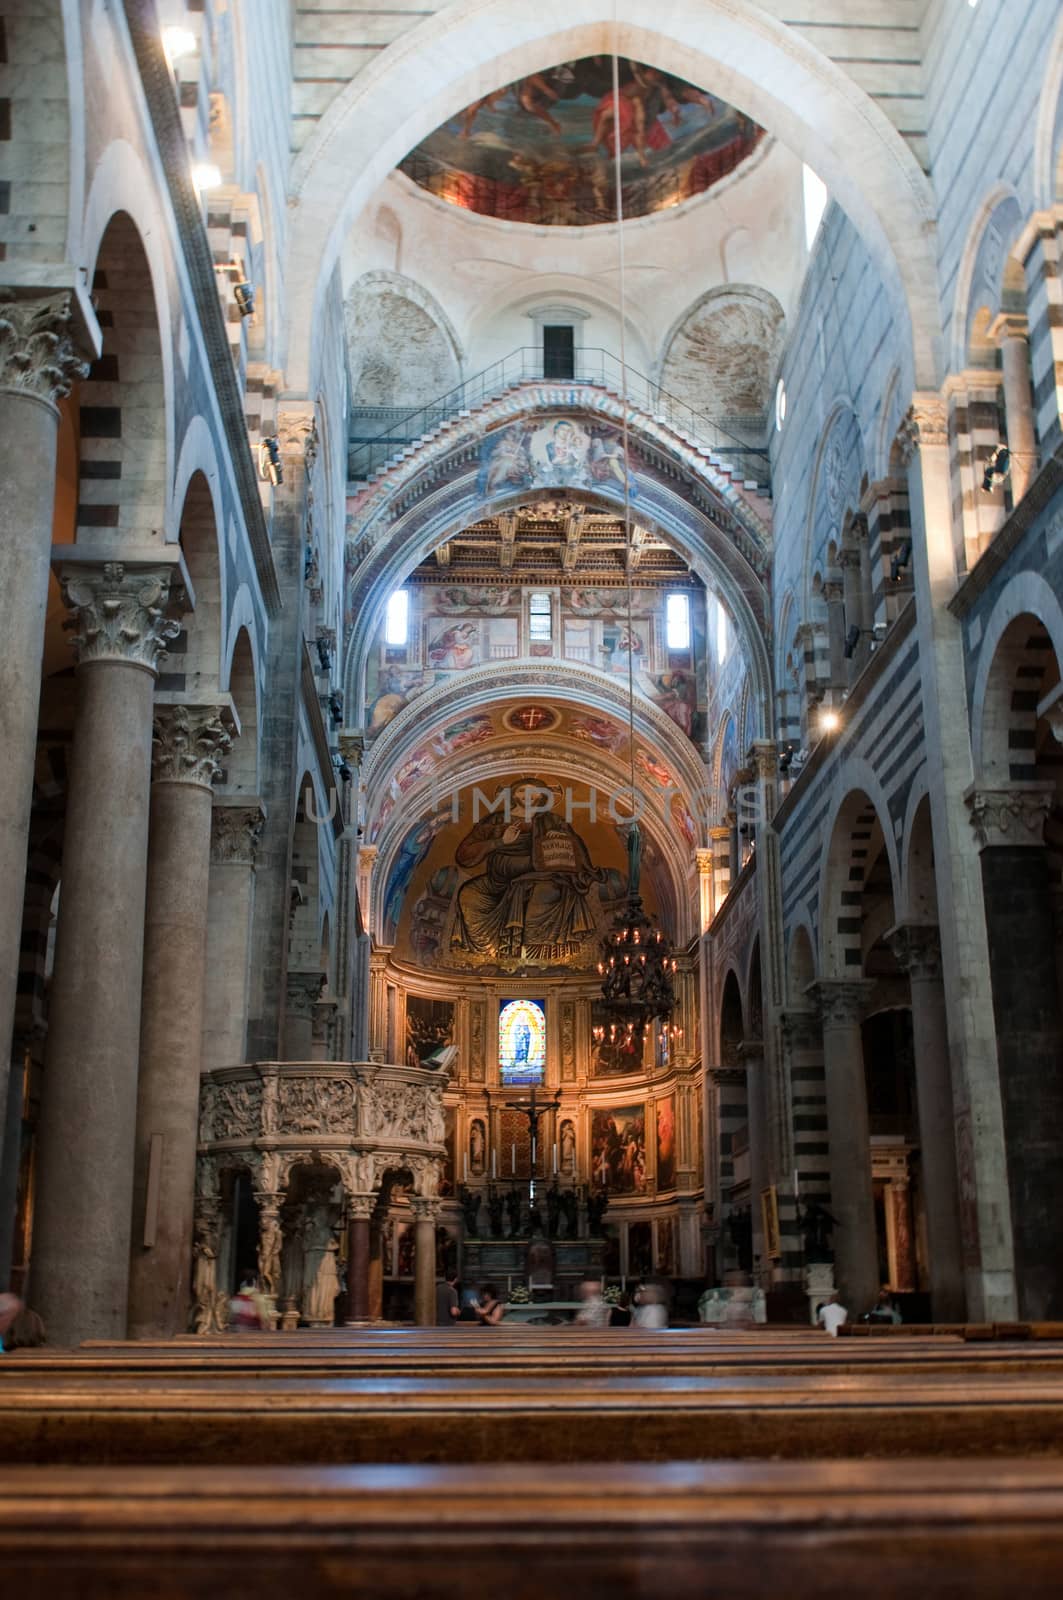 Interior view of the Cathedral of Pisa. Piazza dei miracoli, Pisa, Italy.